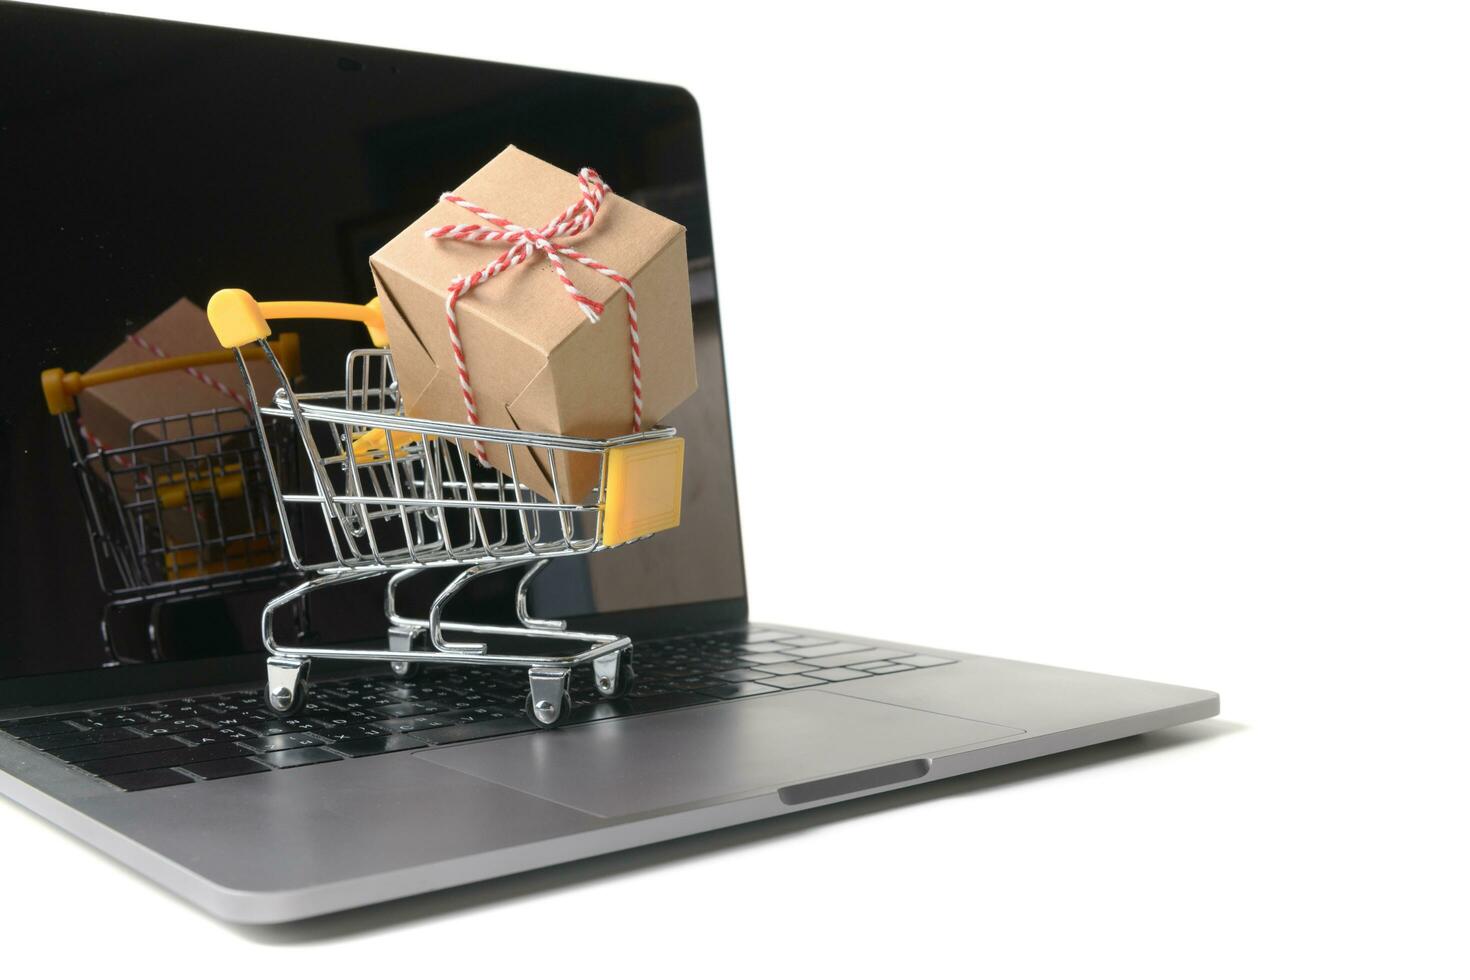 Boxes in a trolley on a laptop keyboard isolated photo